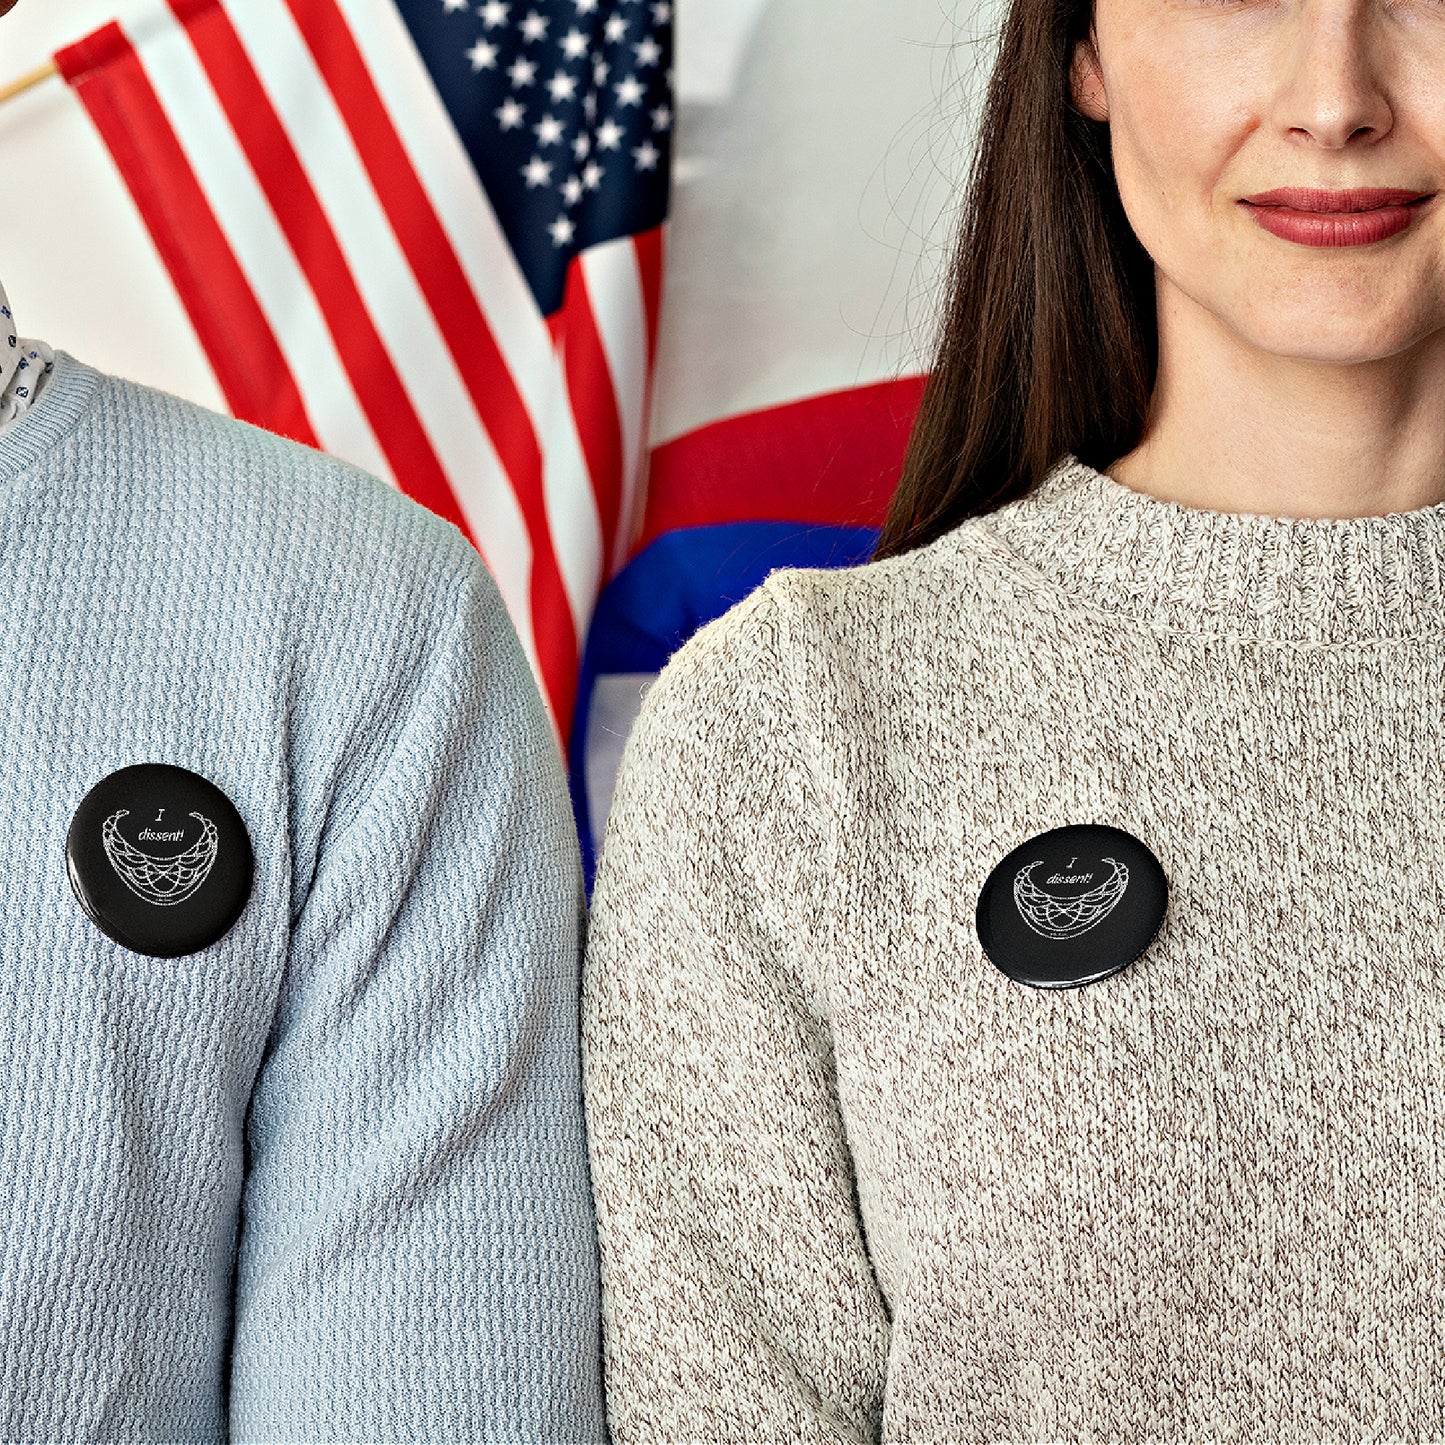 Mock up of two people wearing our RBG-inspired Pin Buttons